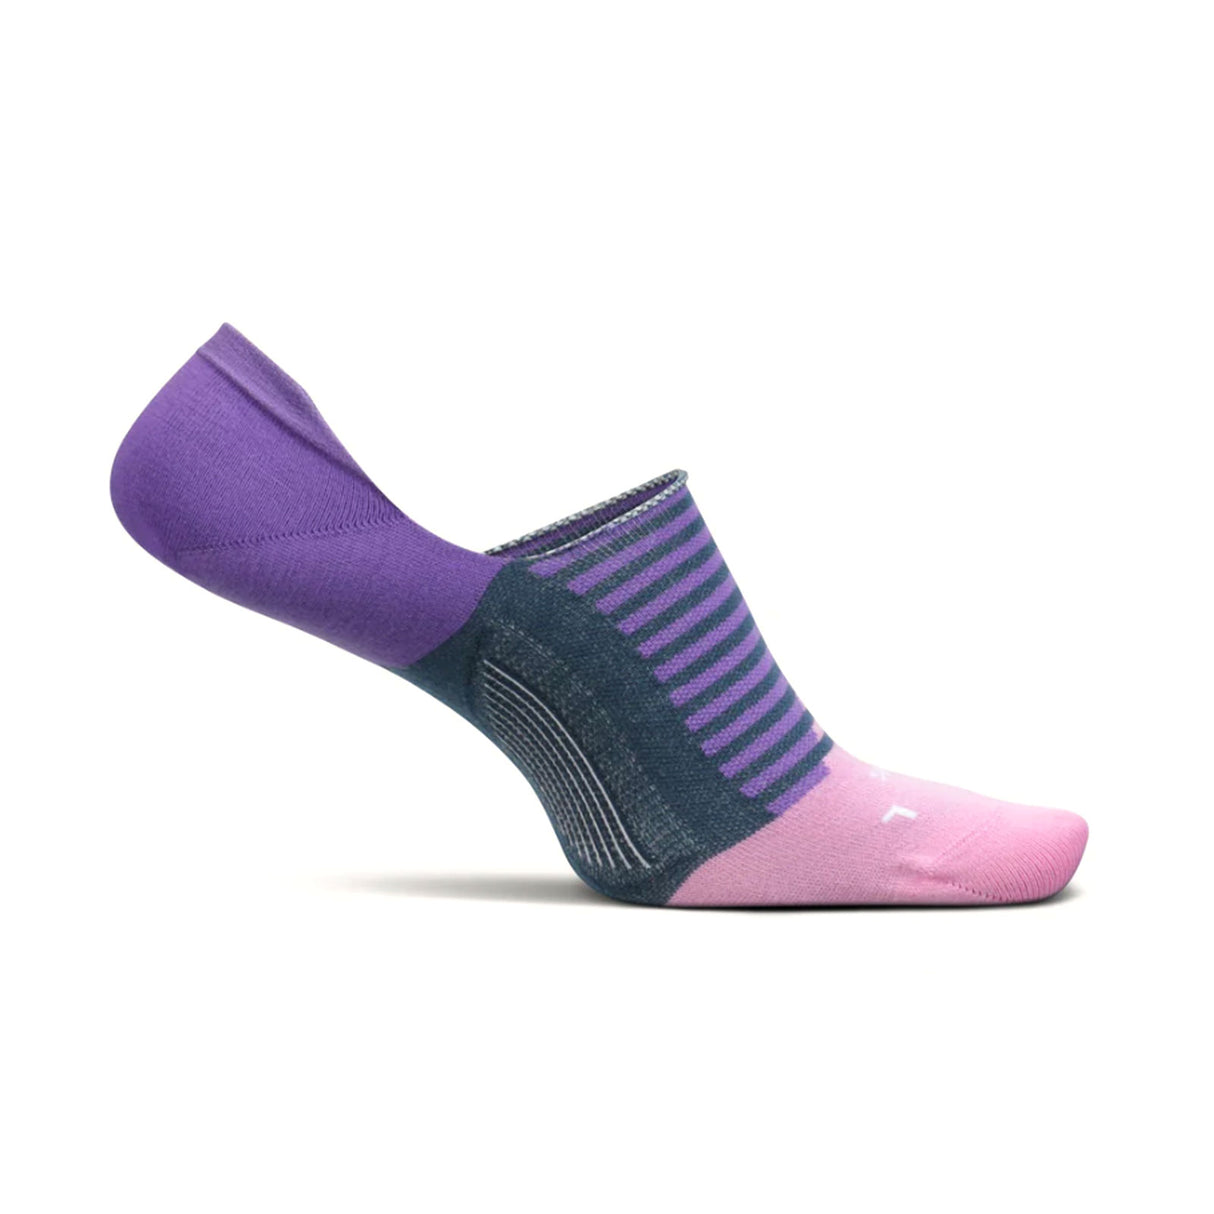 Feetures Ultra Light Invisible No Show Compression Sock (Women) - Manifest Purple Accessories - Socks - Lifestyle - The Heel Shoe Fitters